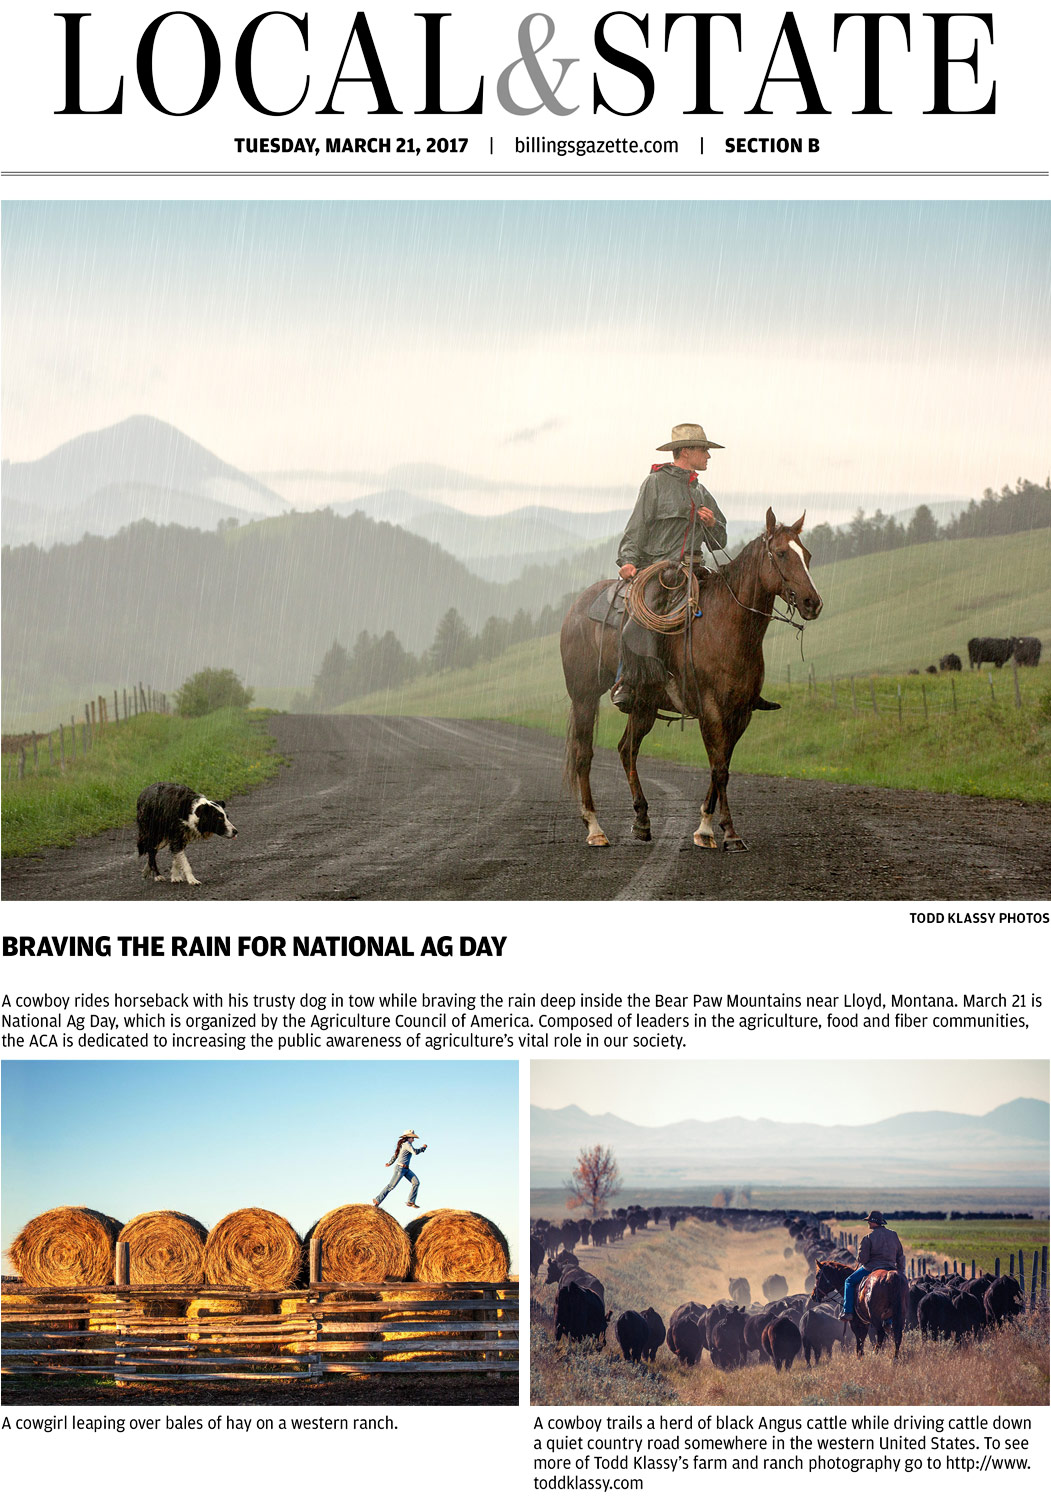 Agriculture photos appear in Billings Gazette for National Ag Day